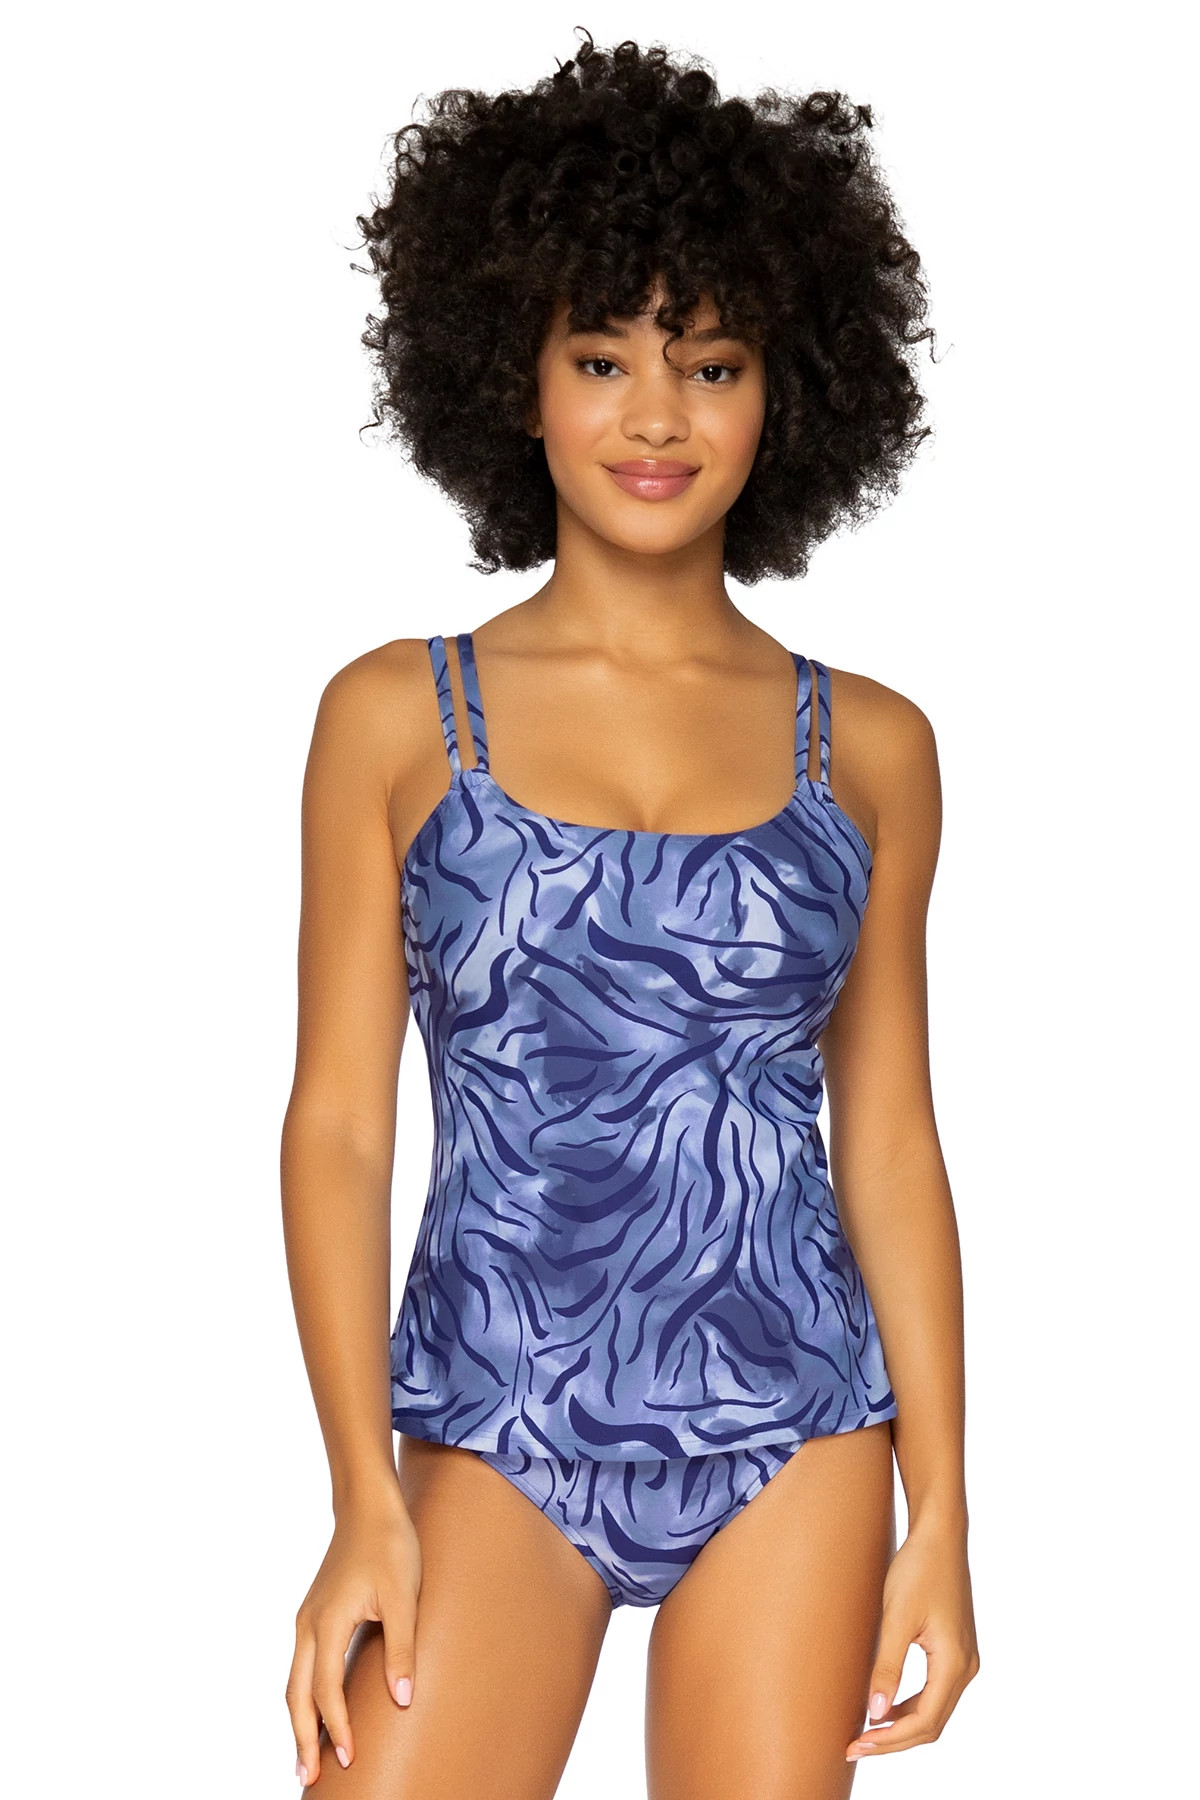 SUMATRA Taylor Over The Shoulder Tankini Top (E-H Cup) image number 1